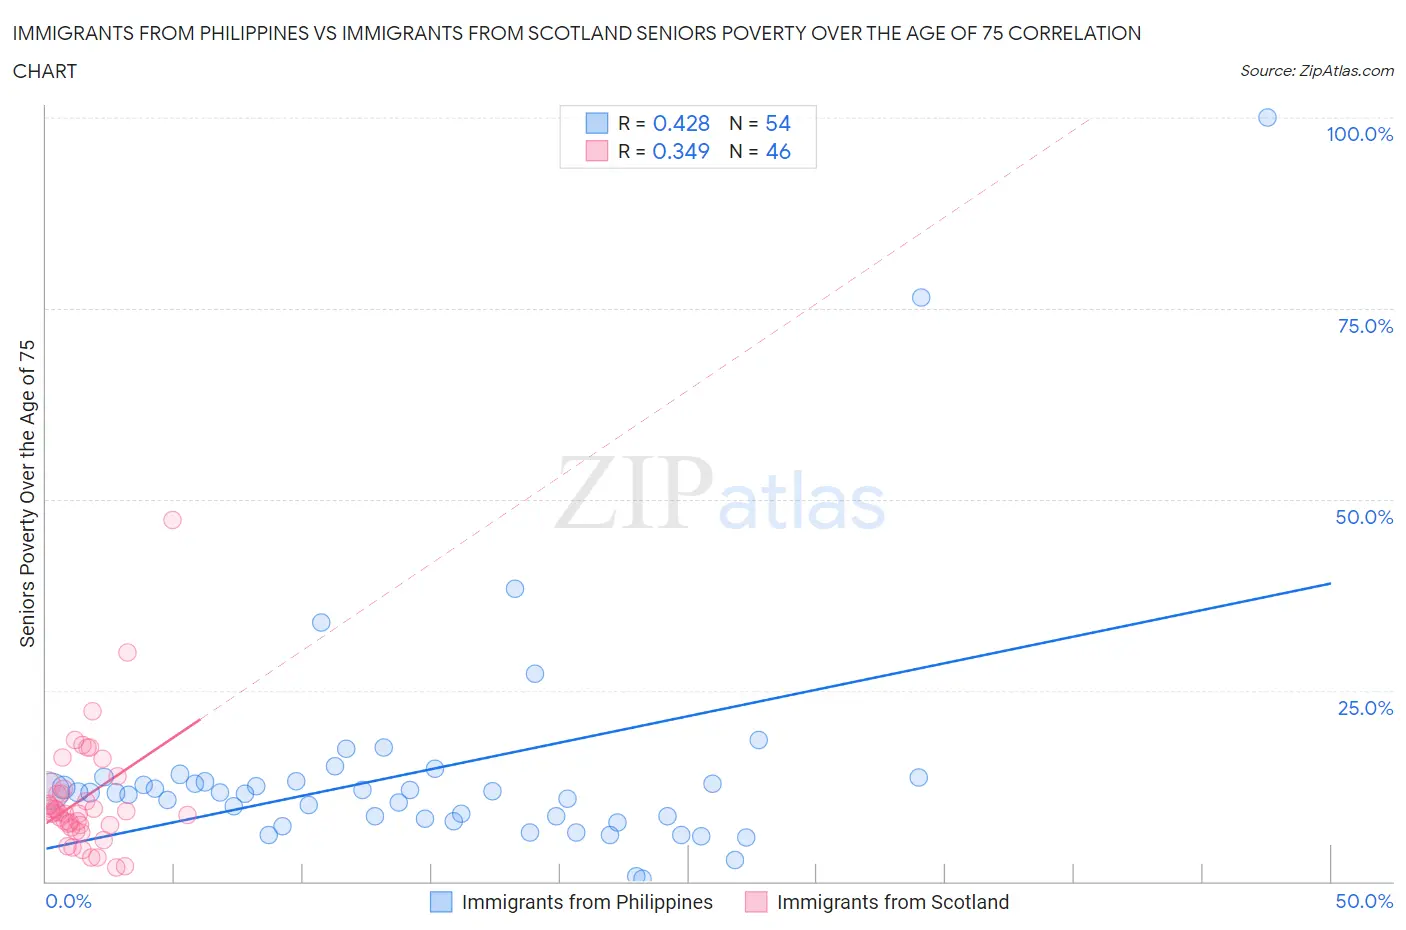 Immigrants from Philippines vs Immigrants from Scotland Seniors Poverty Over the Age of 75